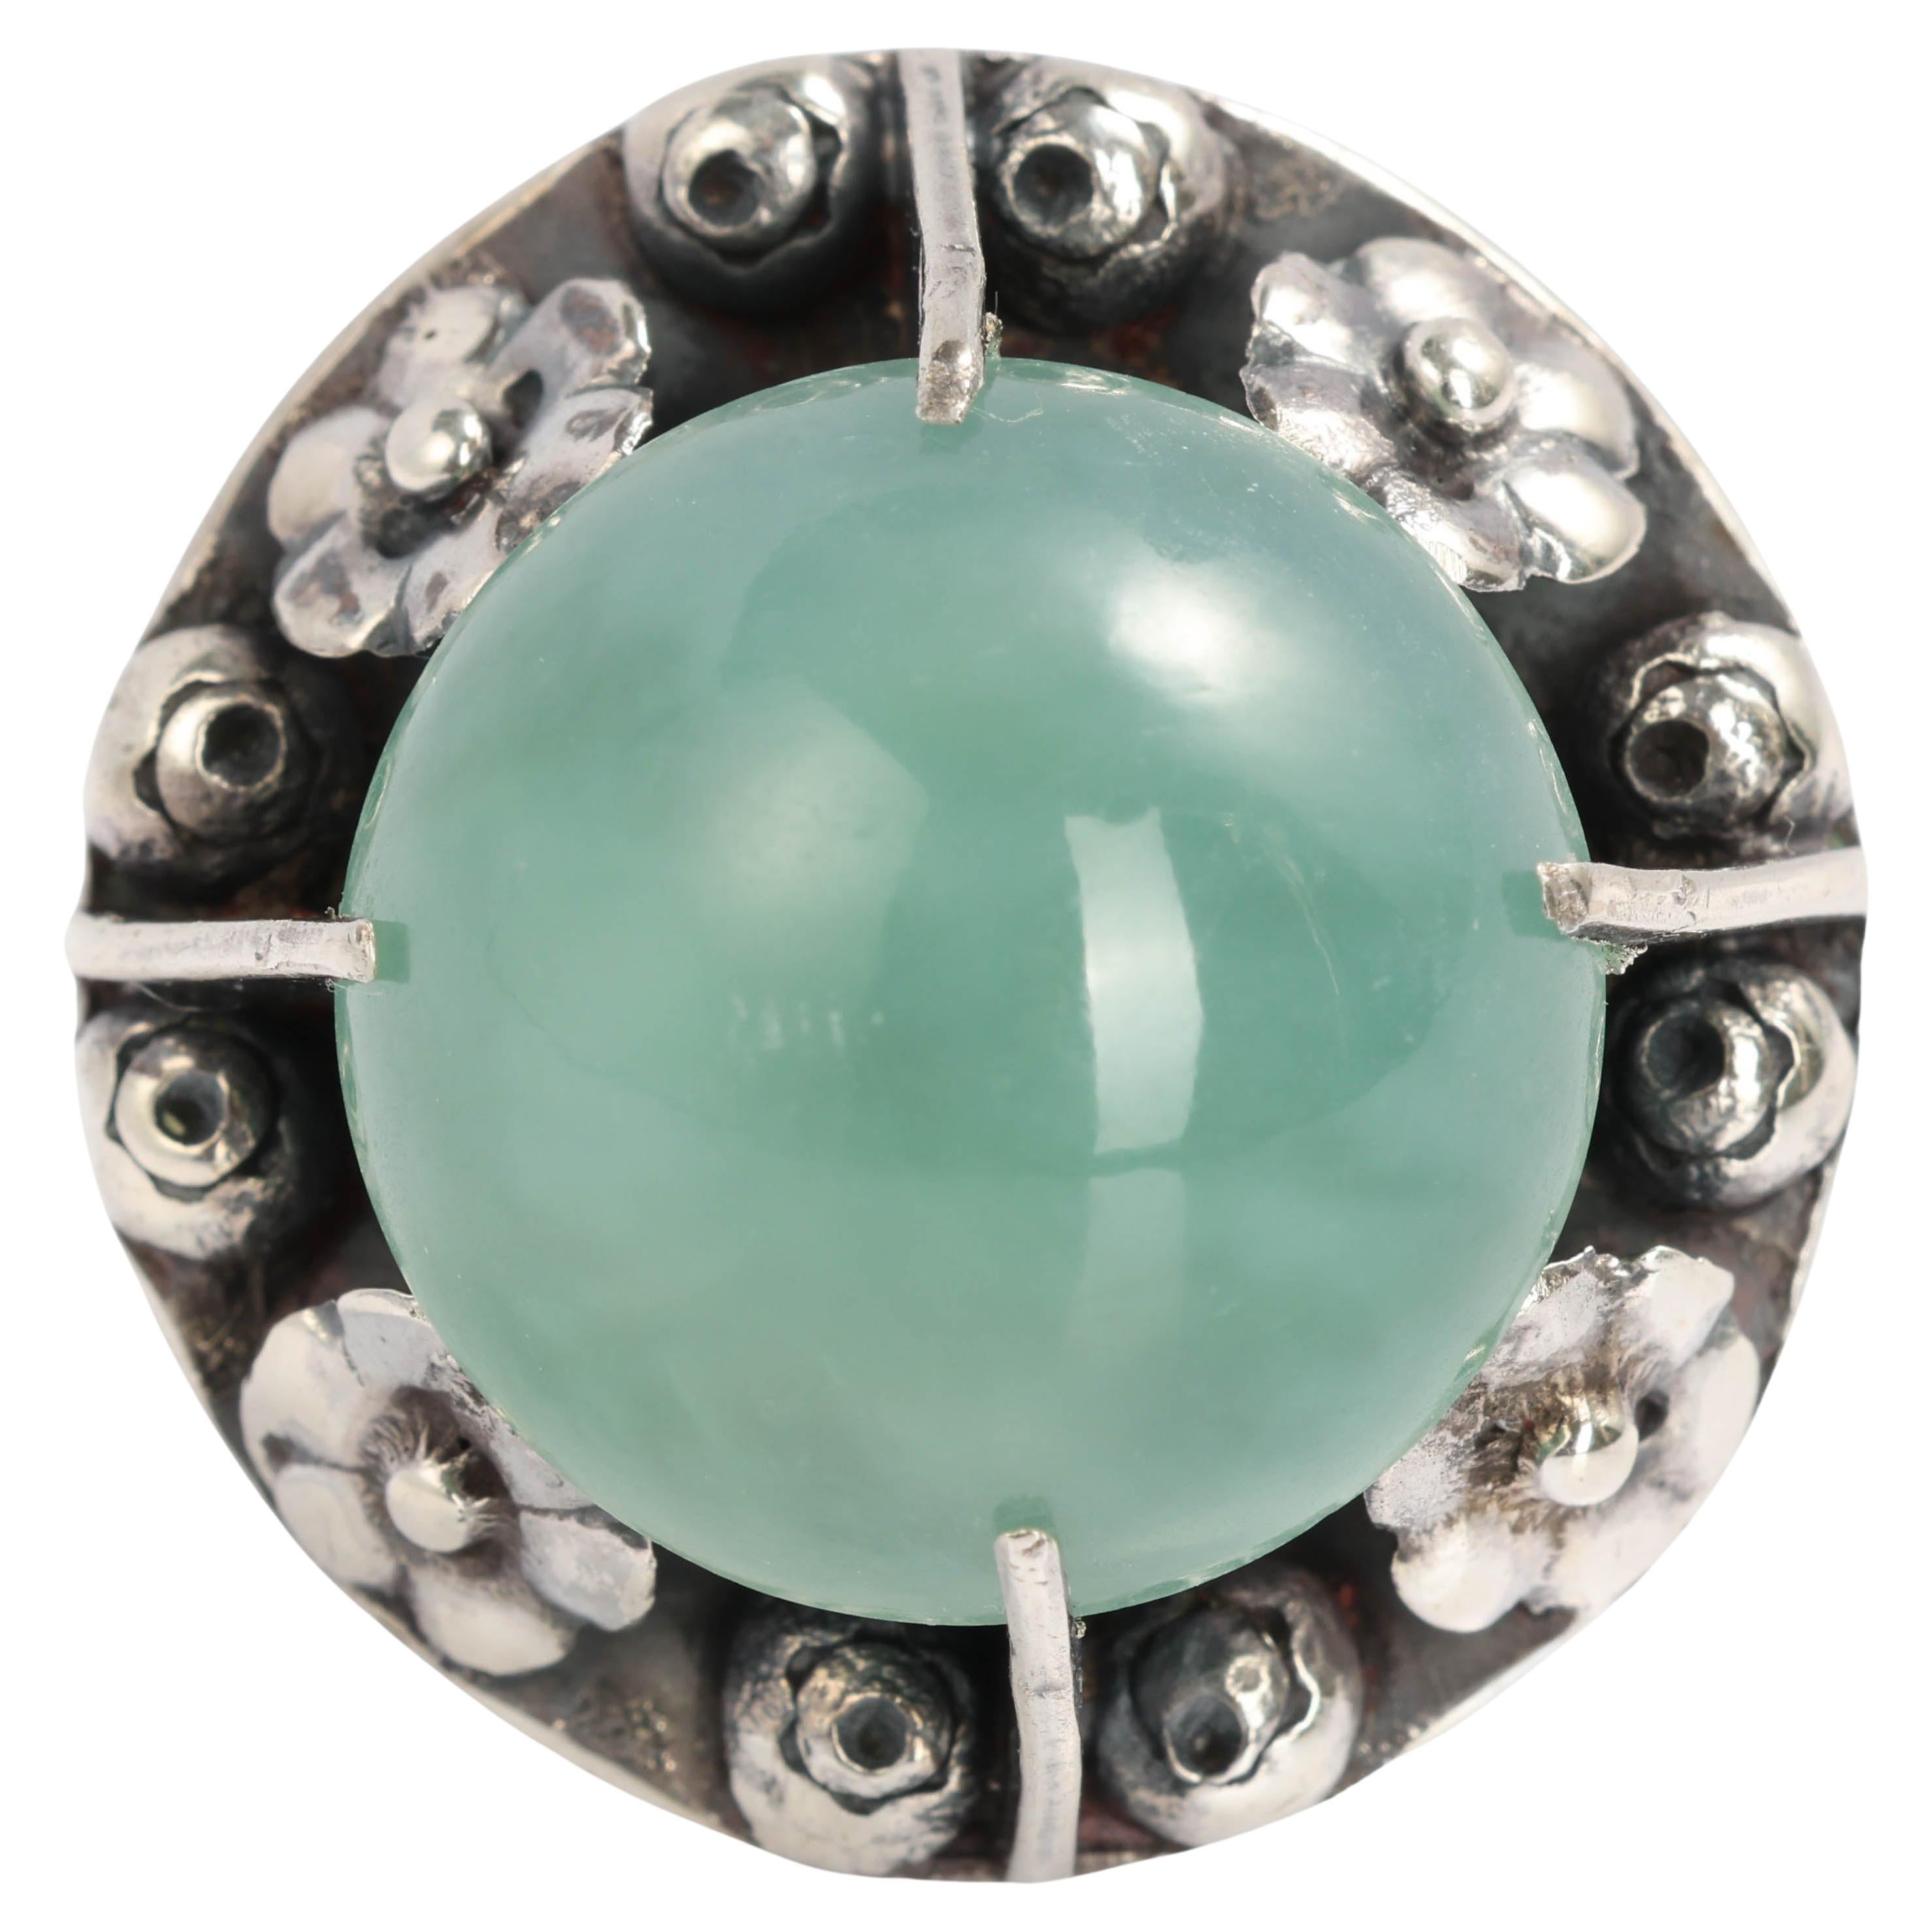 A huge, light seafoam-green cabochon of semi-transparent, natural, and untreated Burmese jadeite jade glows from across the room in its handmade silver Arts & Crafts era mounting.  I have seen similar 